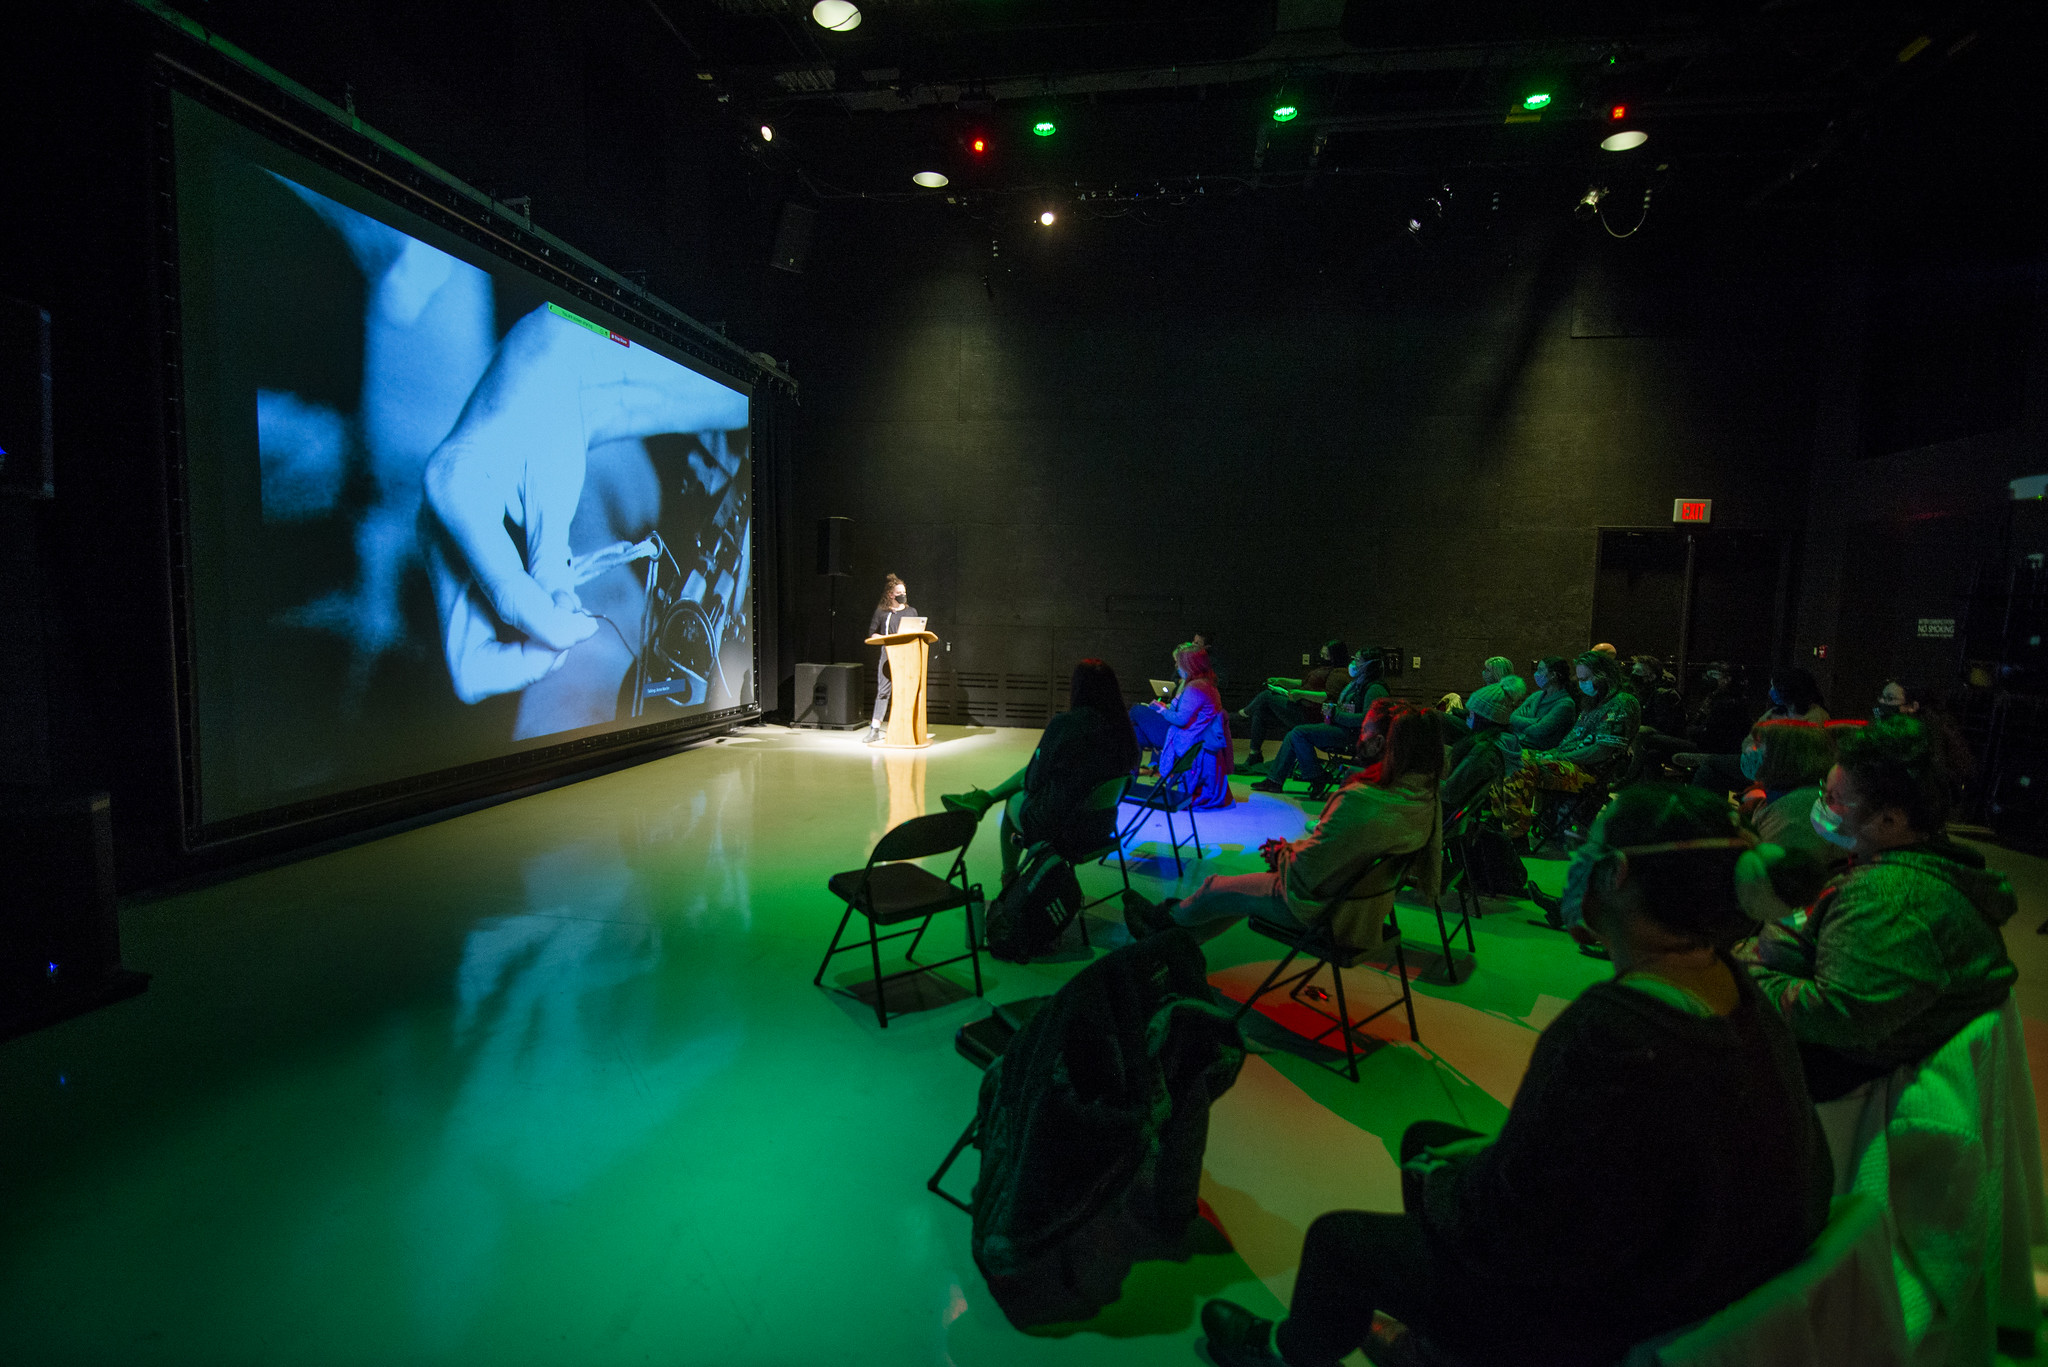 Kate Fogler presents inside the Adaptive Presentation and Performance Envrionment at IMRC Center. There is a large projection screen with an image of a hand pulling a needle through fabric. Green lighting from the ceiling of the room and students in chairs.